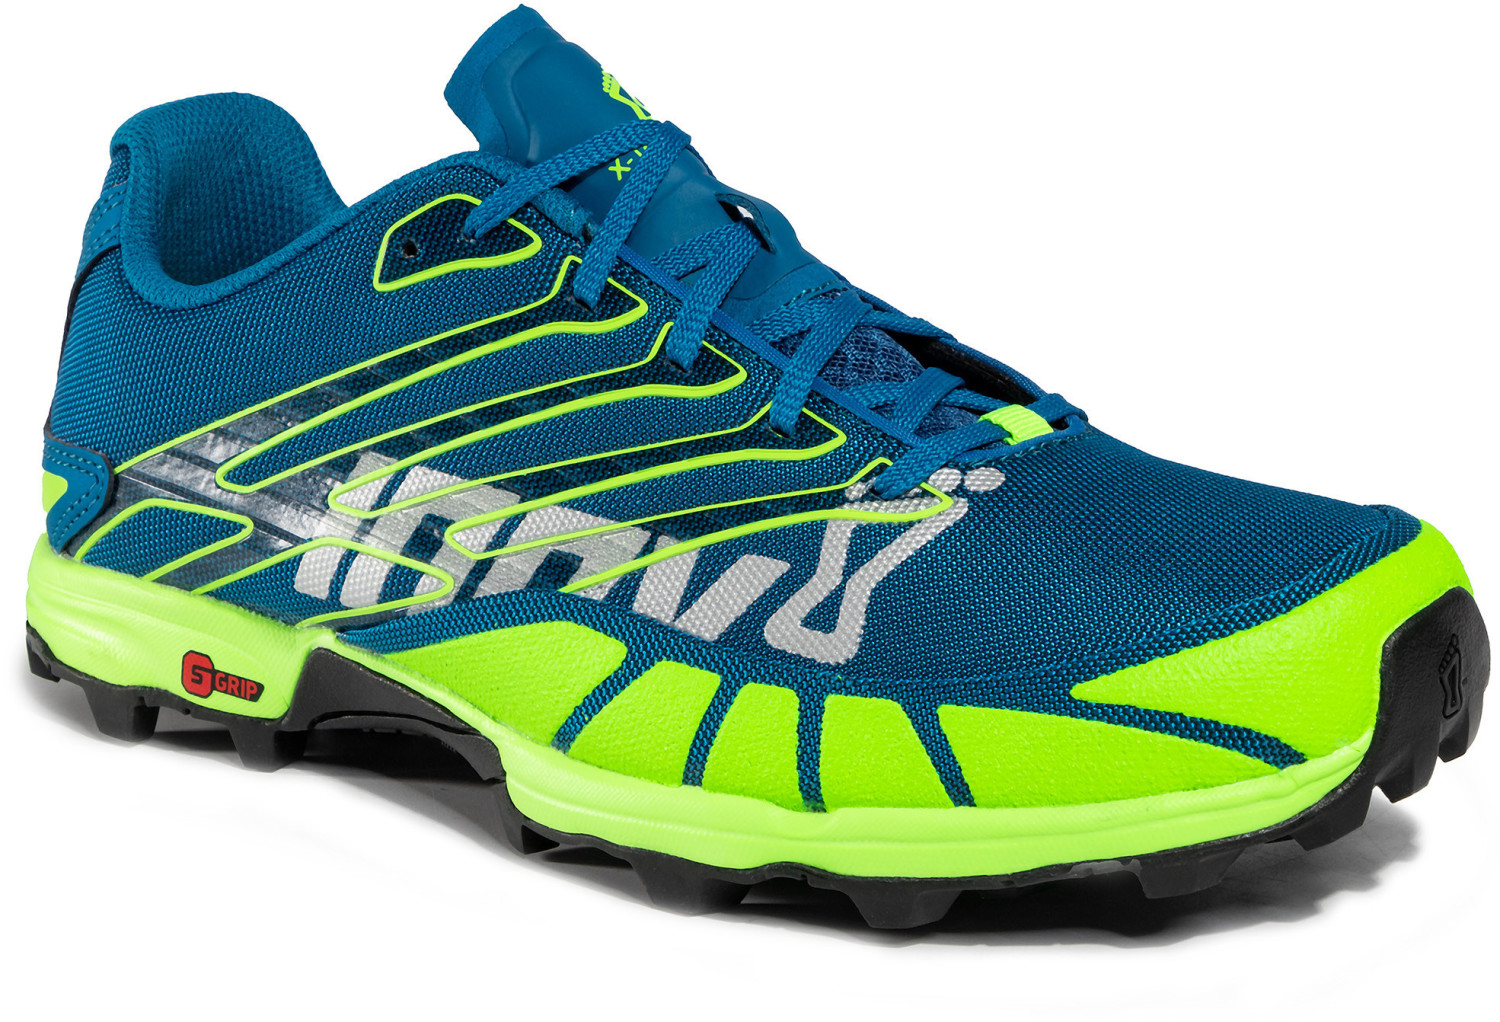 Buy Inov-8 X-Talon 255 blue green from £87.99 (Today) – Best Deals on ...